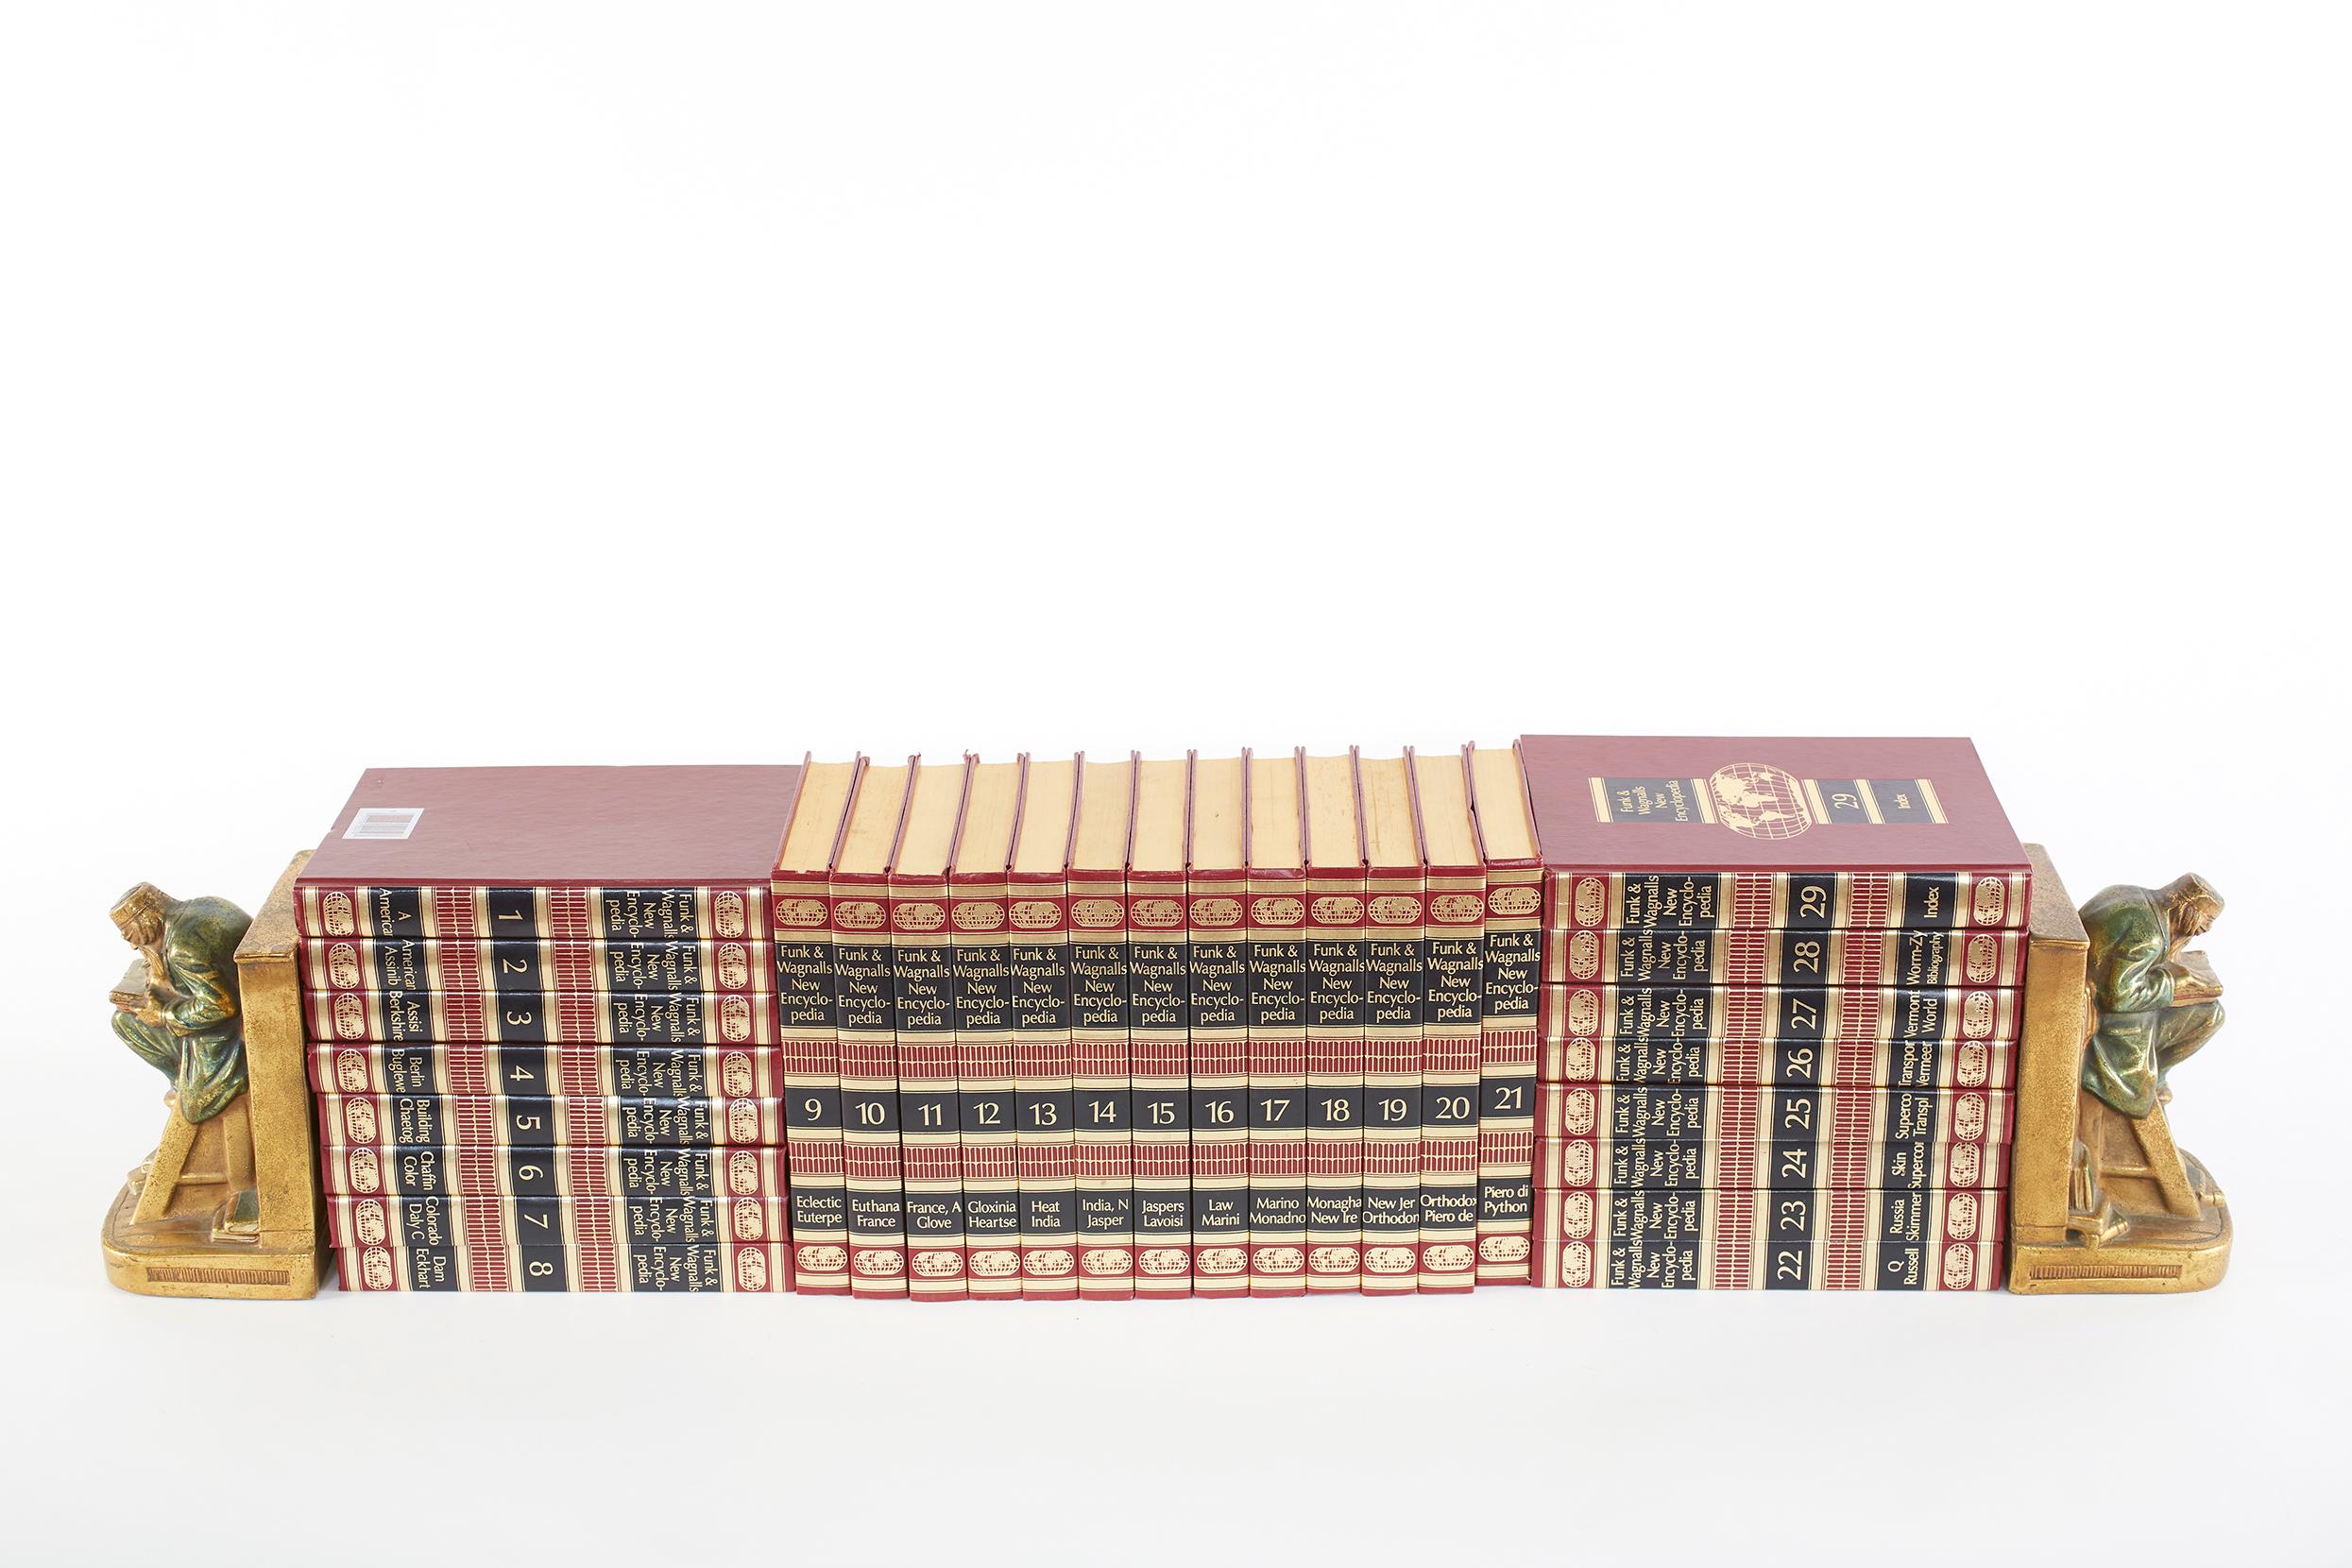 Gilt leather bound sturdy / library room complete collection set. The set include twenty 28 volumes. Funk & Wagnalls, New Encyclopedia. Each book is in great condition. Minor wear consistent with age / use. Each book measure about 9.2 inches long x